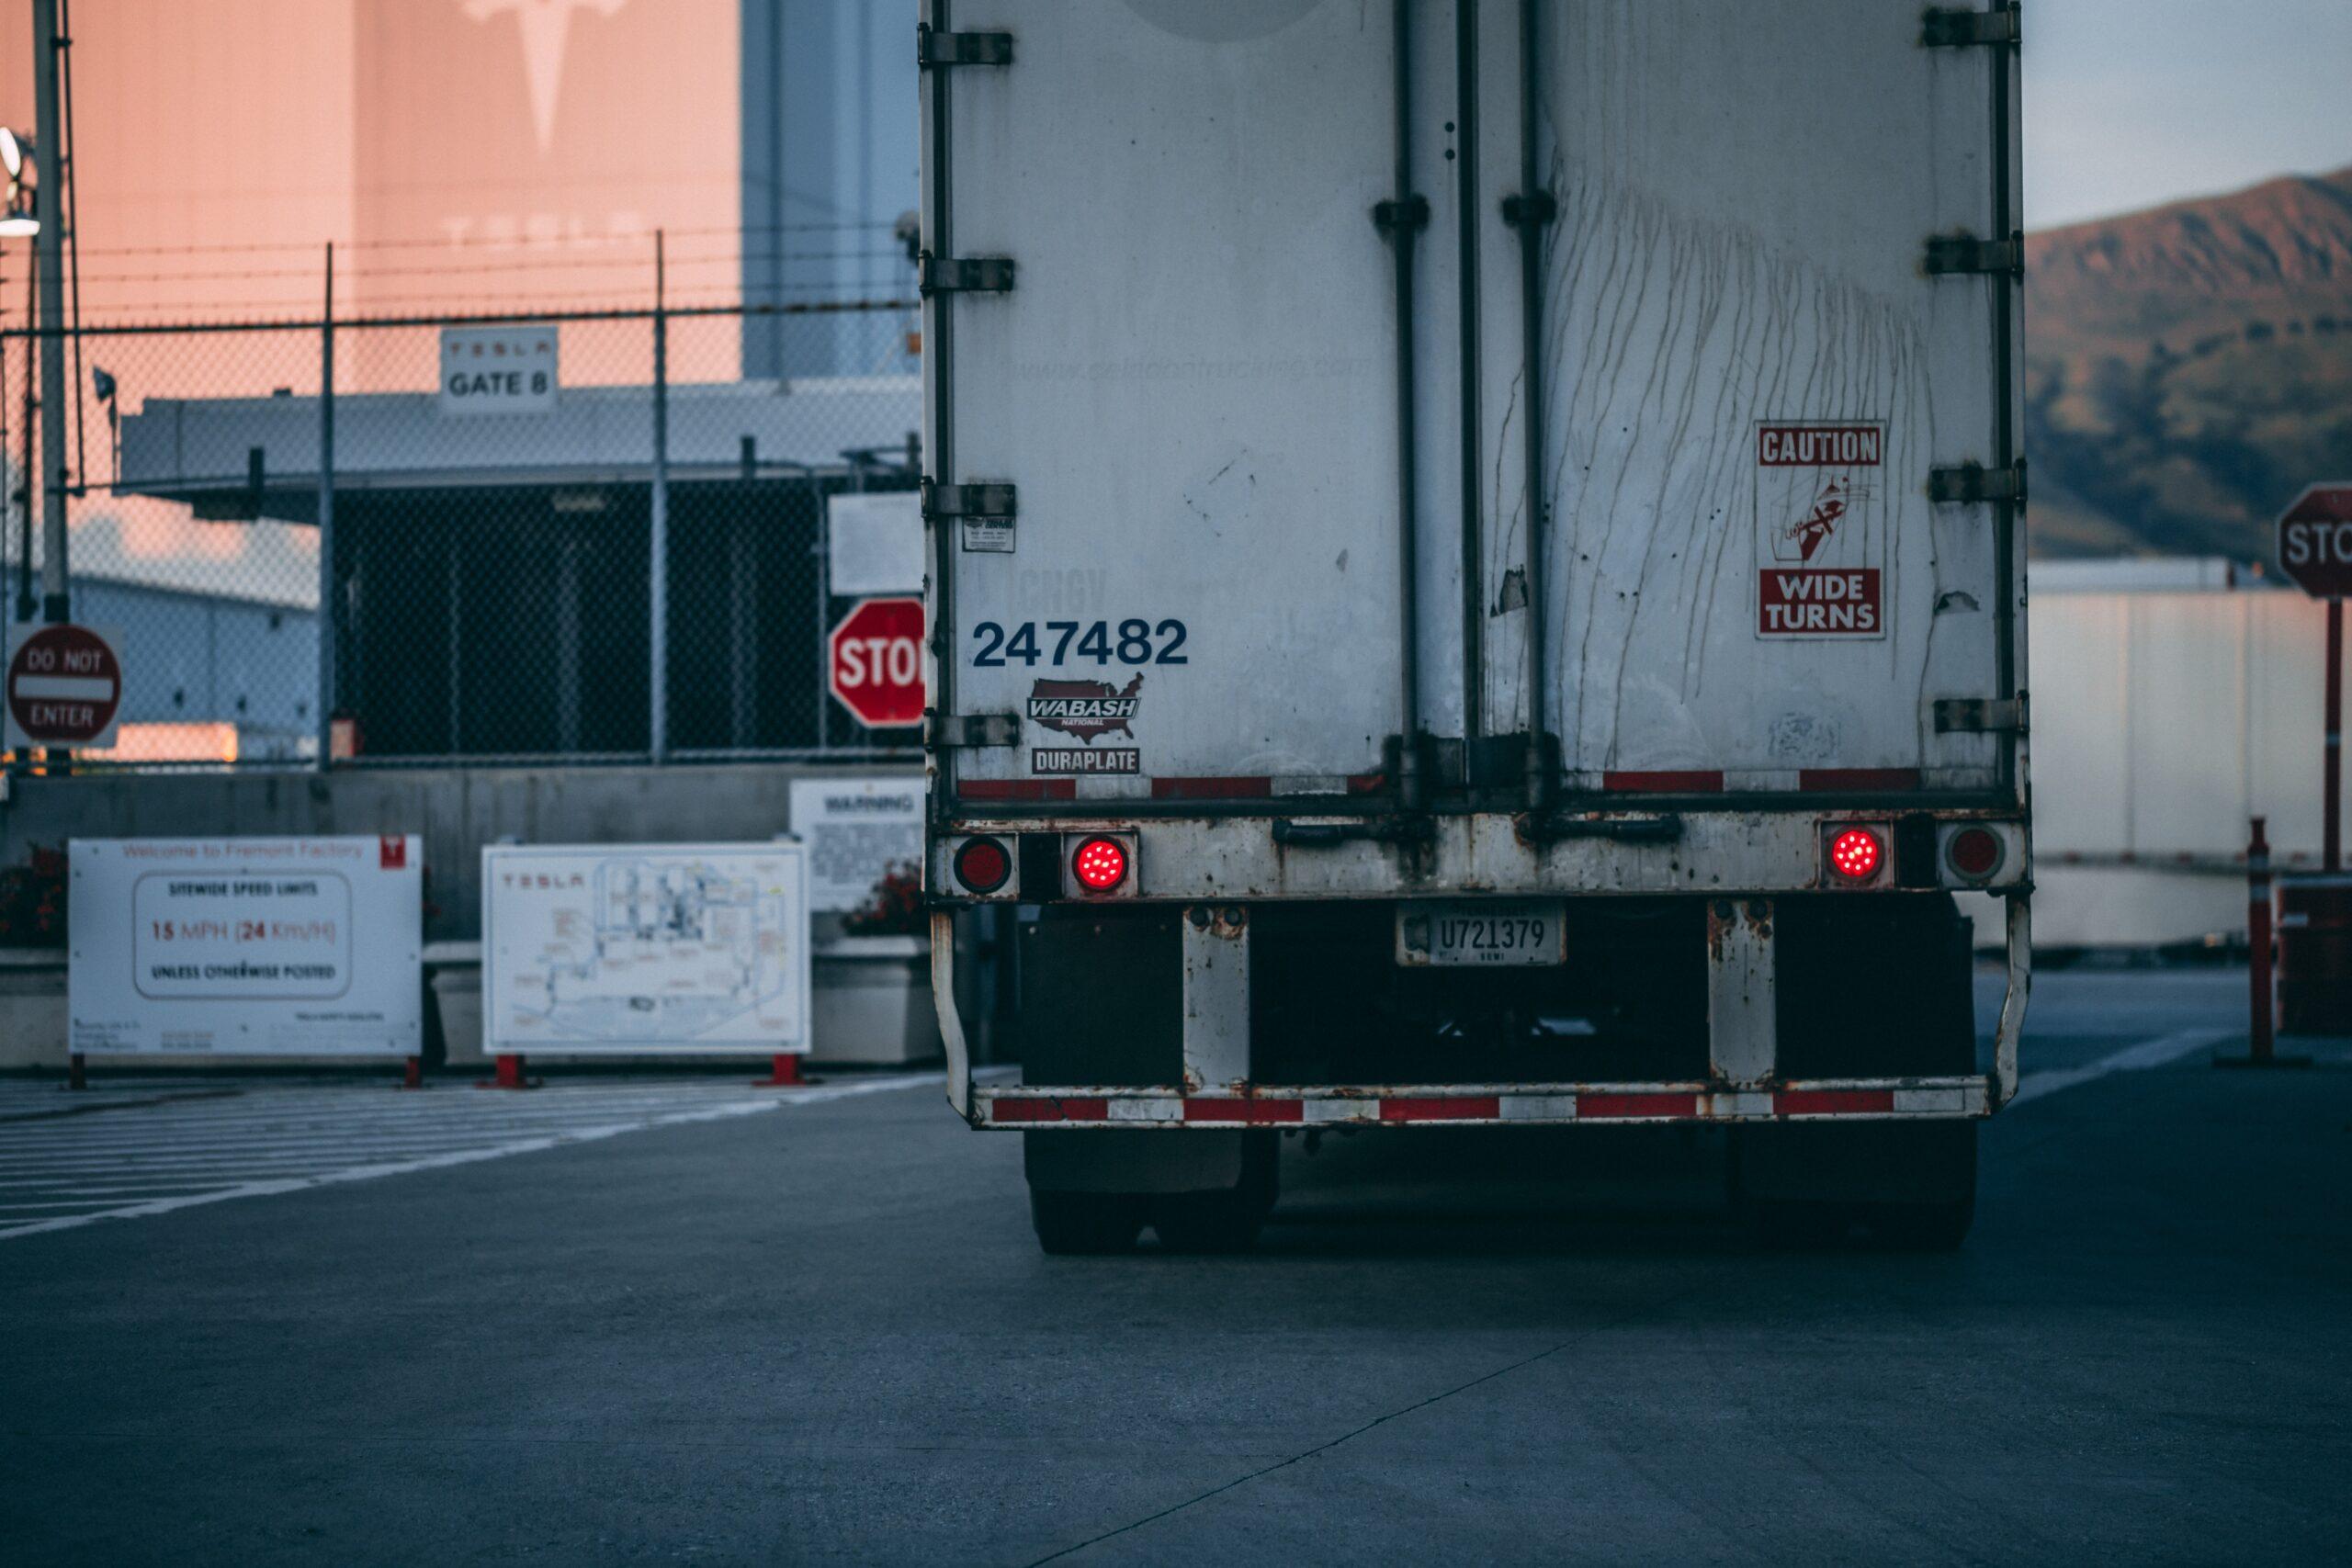 Image Url: https://www.pexels.com/photo/white-freight-truck-close-up-photography-2449454/